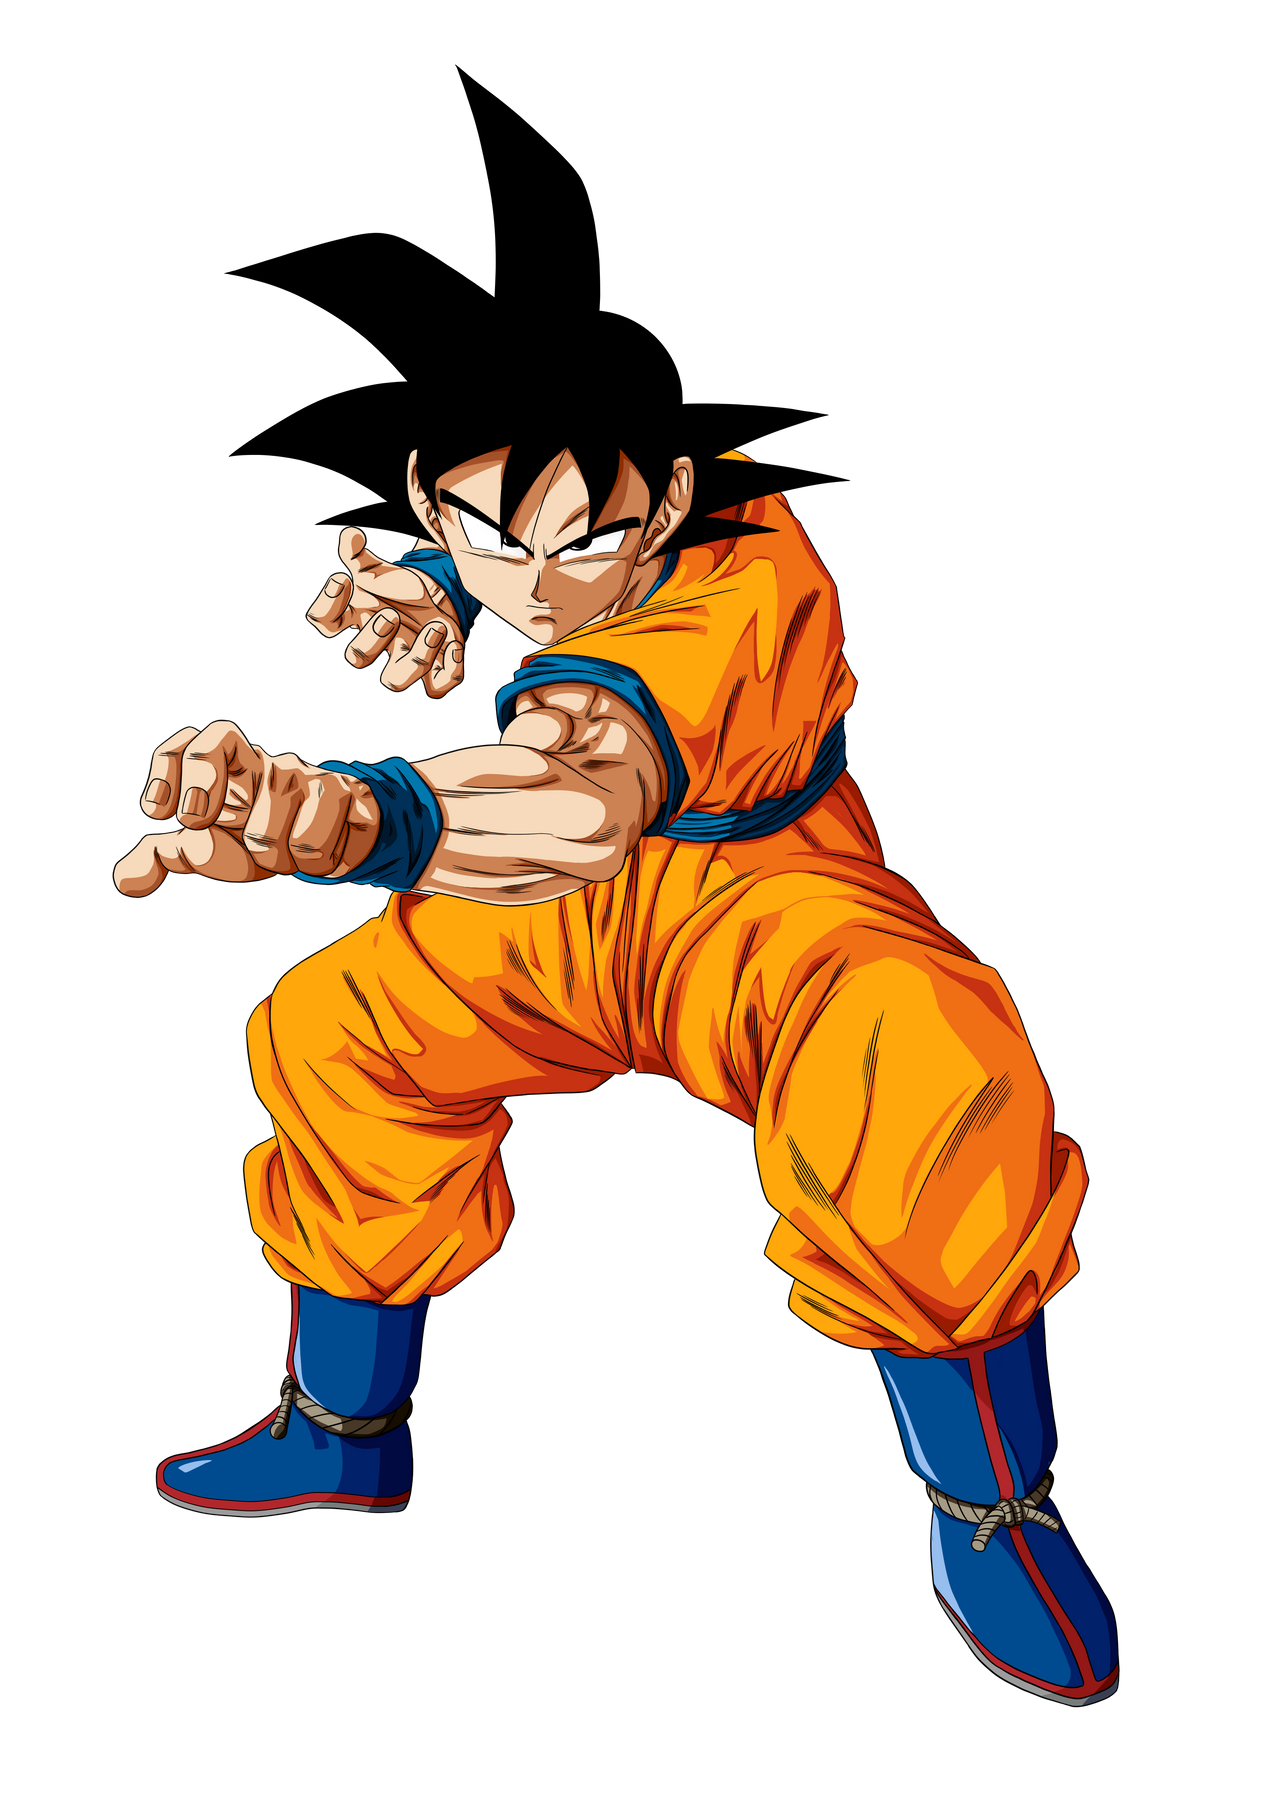 Son Goku {Dragon Ball Heroes} (Render) by yessing on DeviantArt